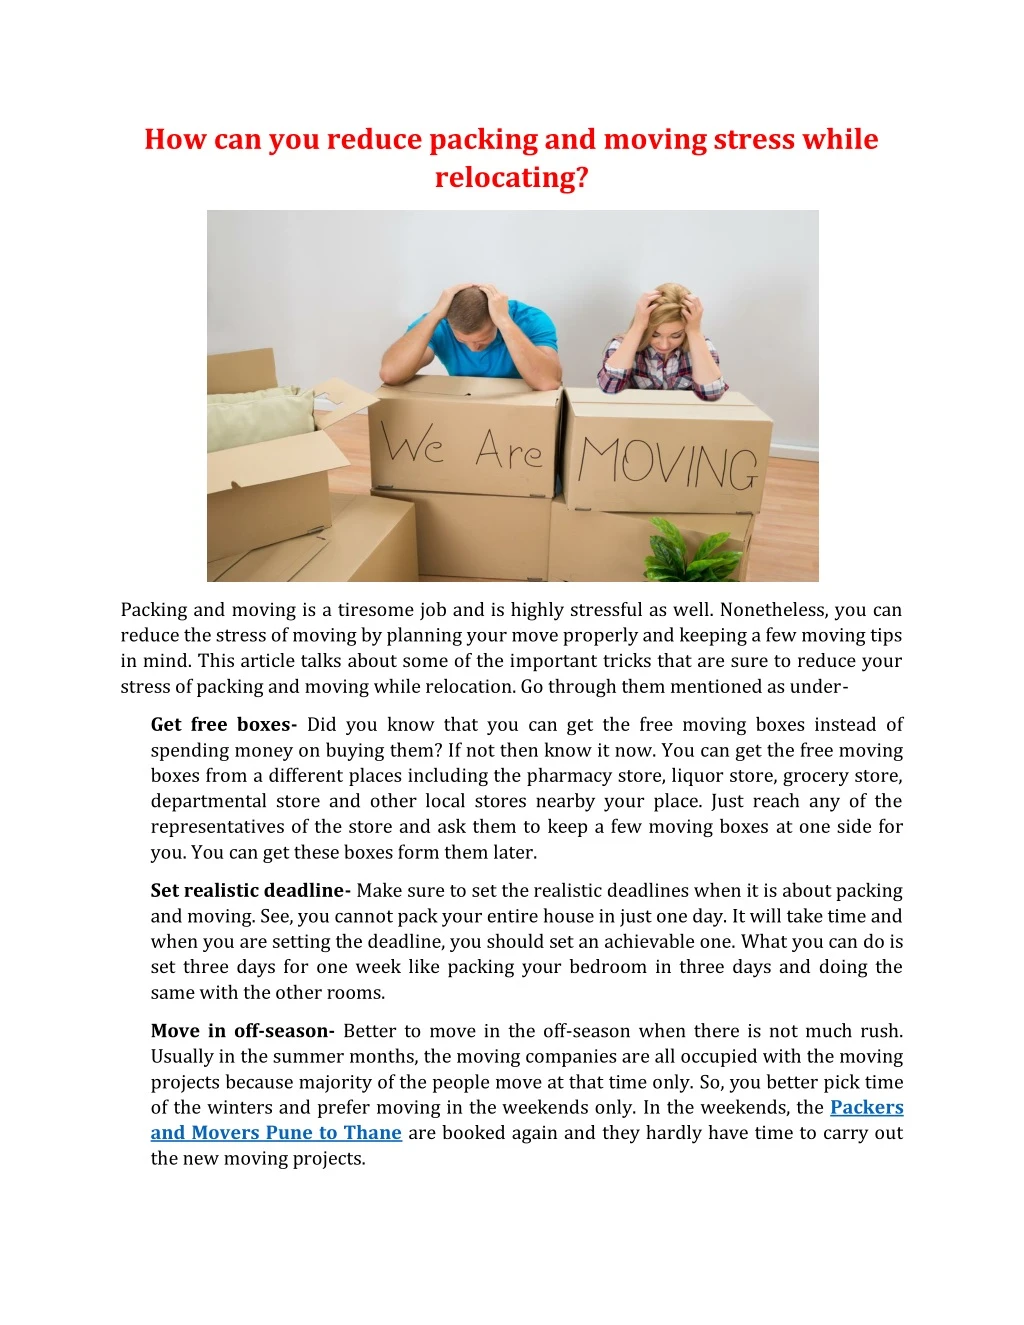 how can you reduce packing and moving stress